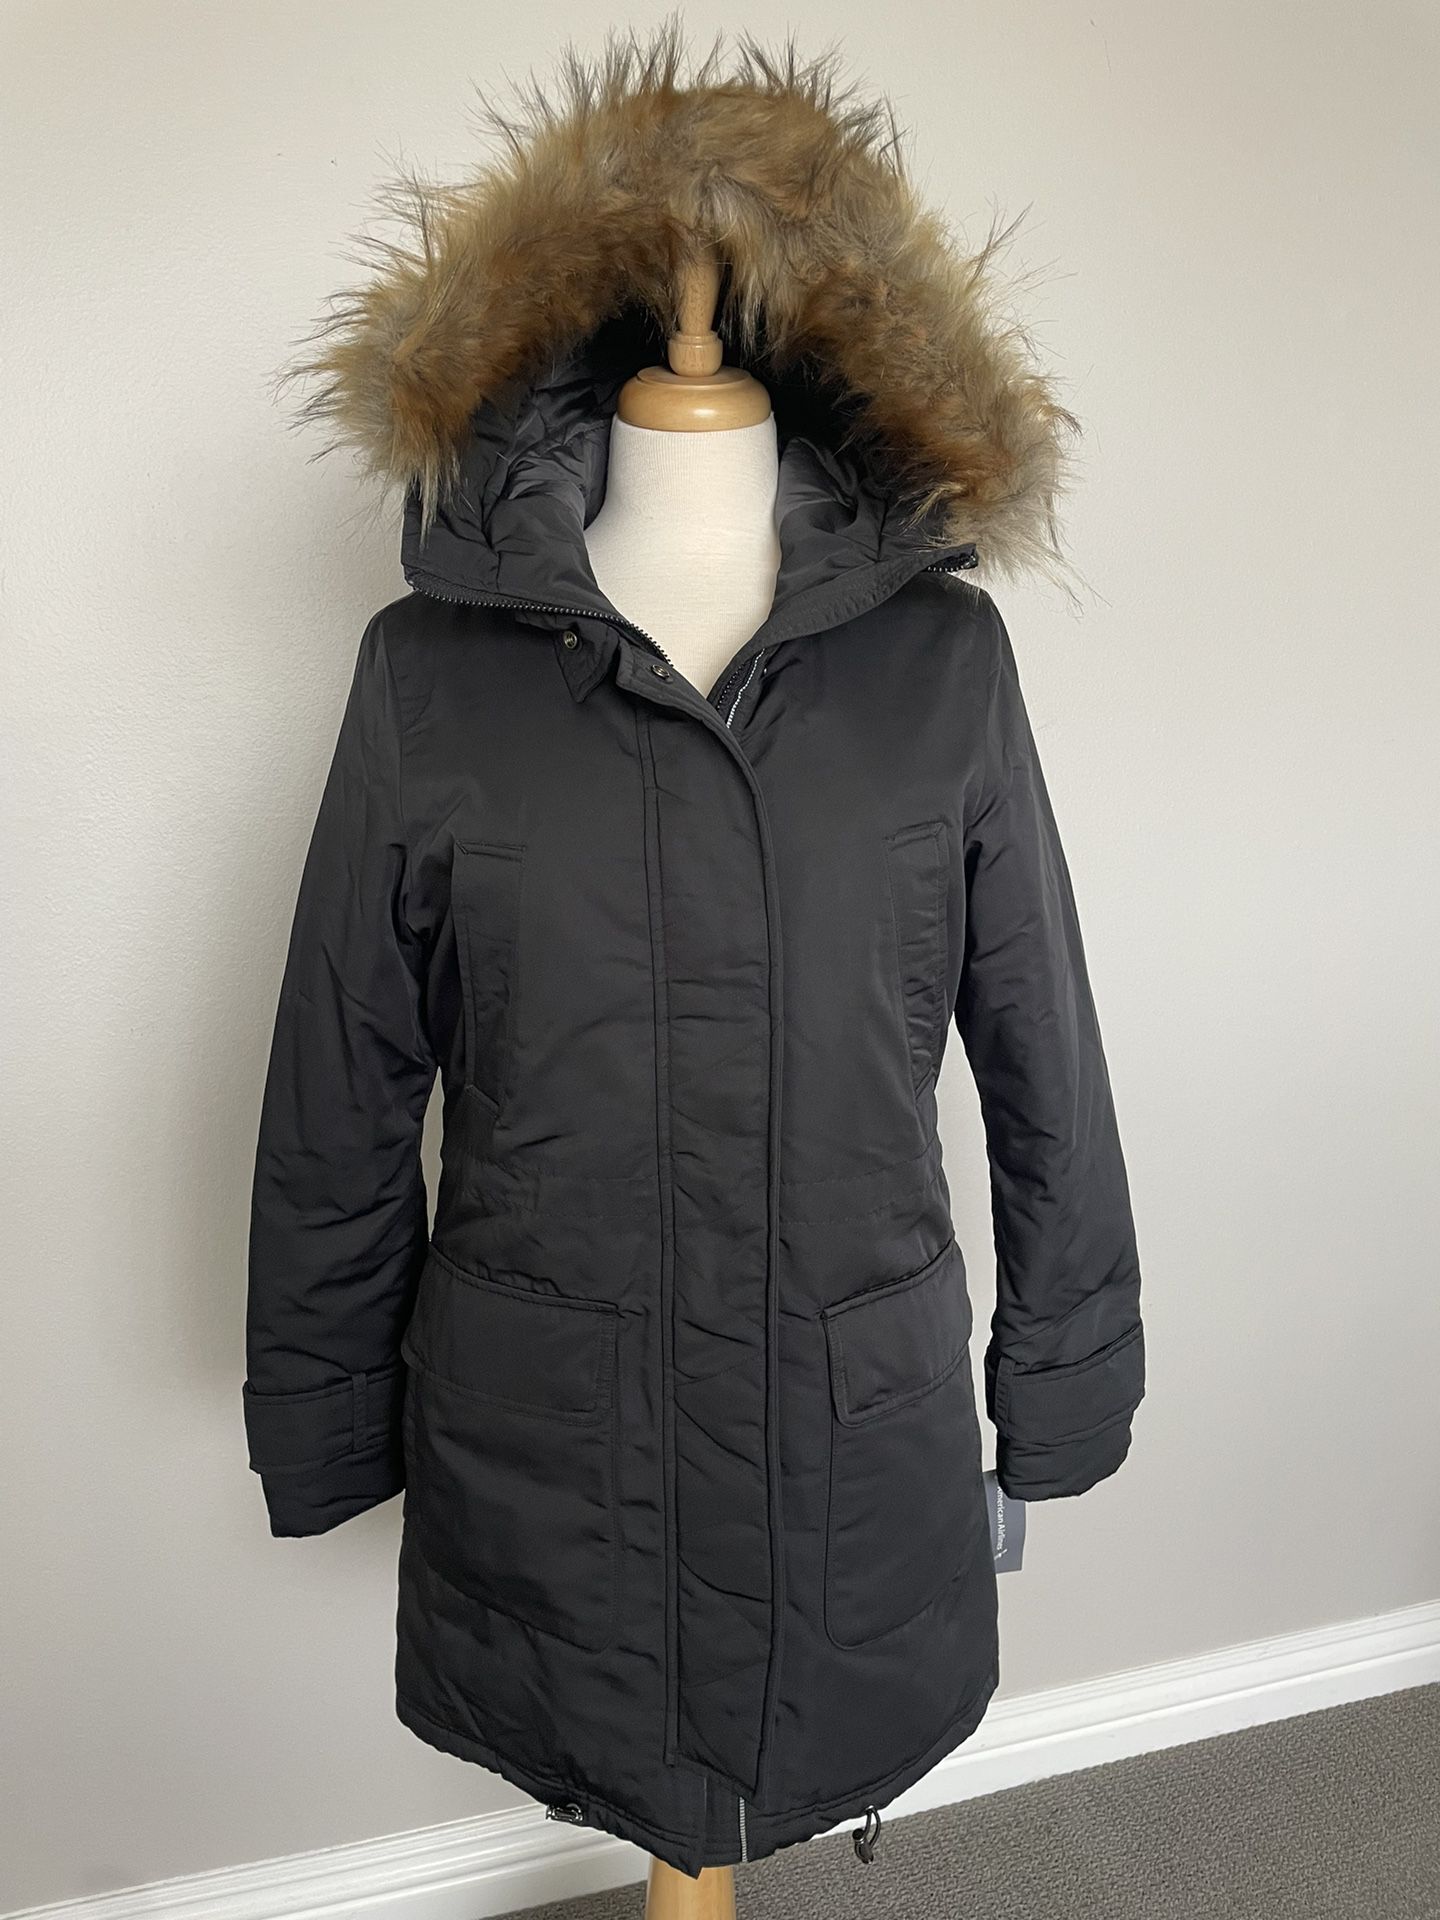 NWT American Airlines Ladies Parka Jacket - XS